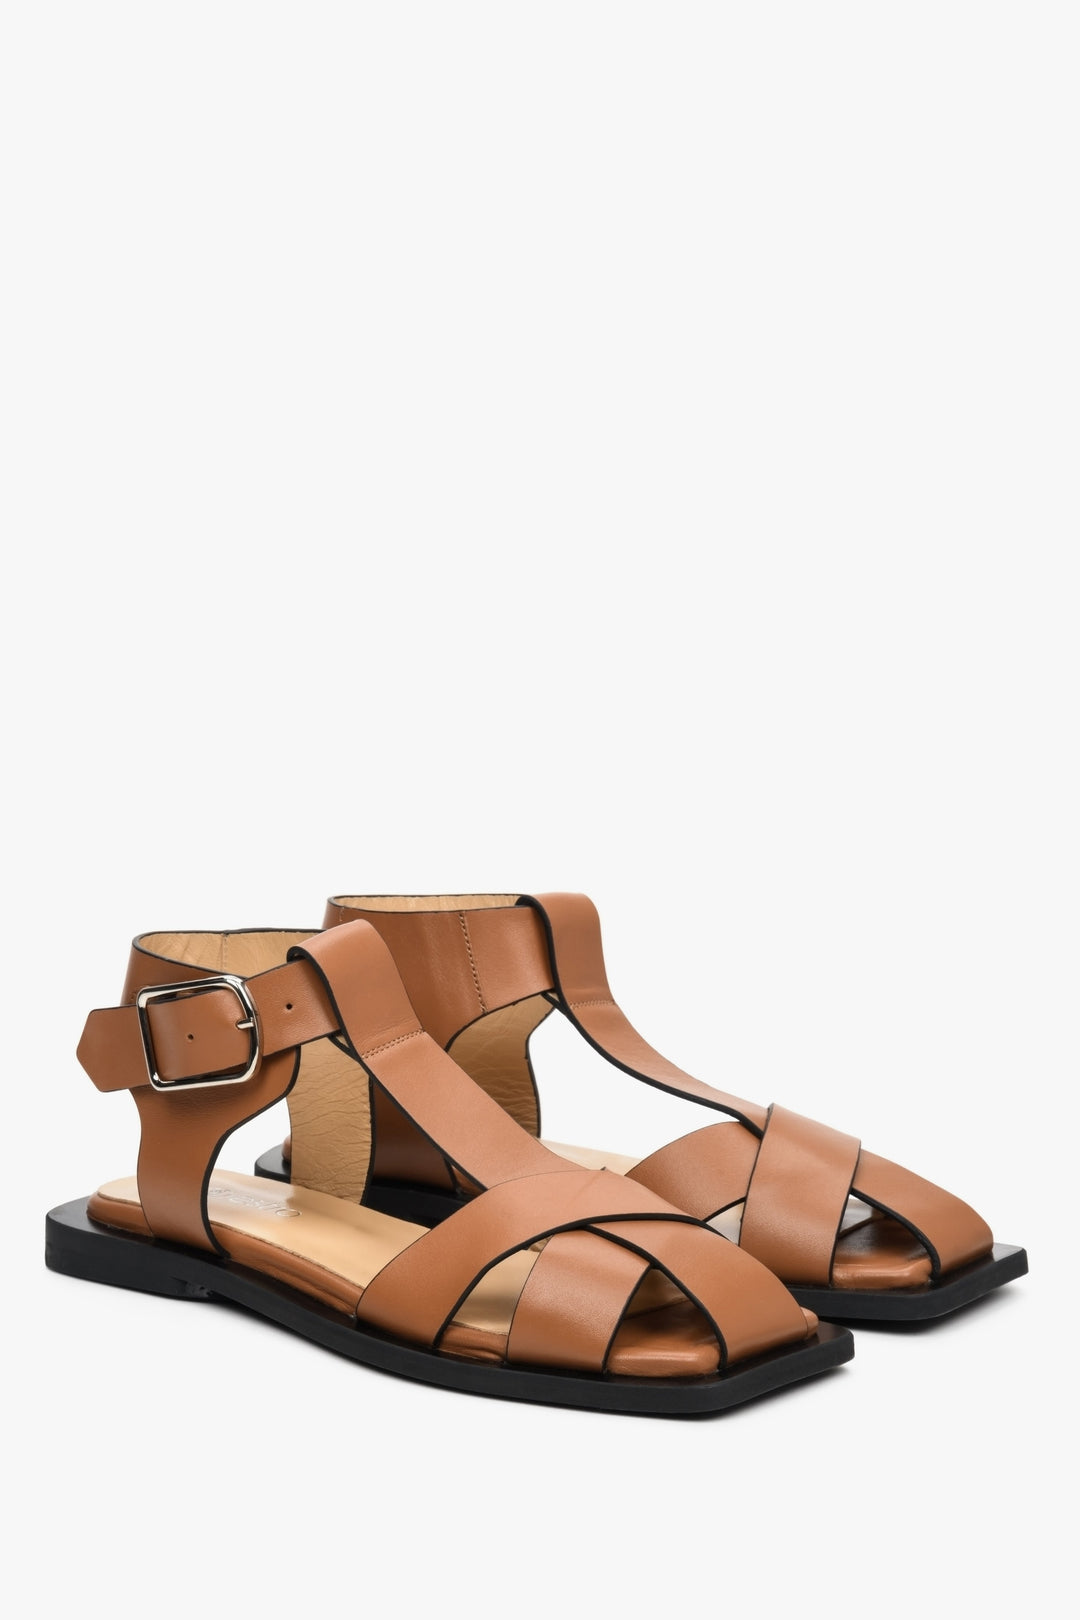 Brown leather women's strappy sandals by Estro - presentation of the top of the shoe and the side seam.